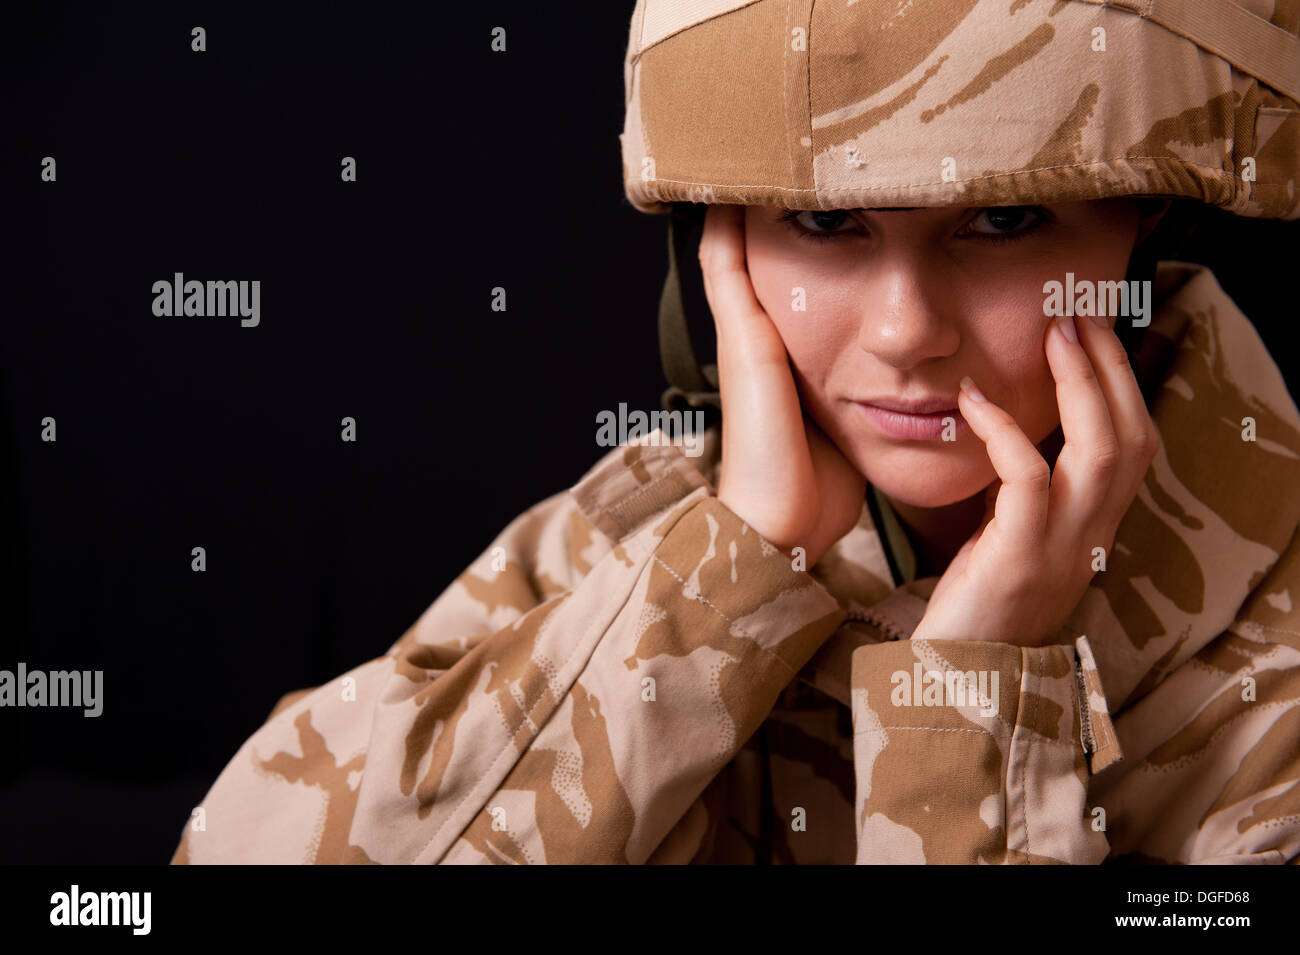 Distraught young female soldier wearing British Military uniform against a black background. Stock Photo